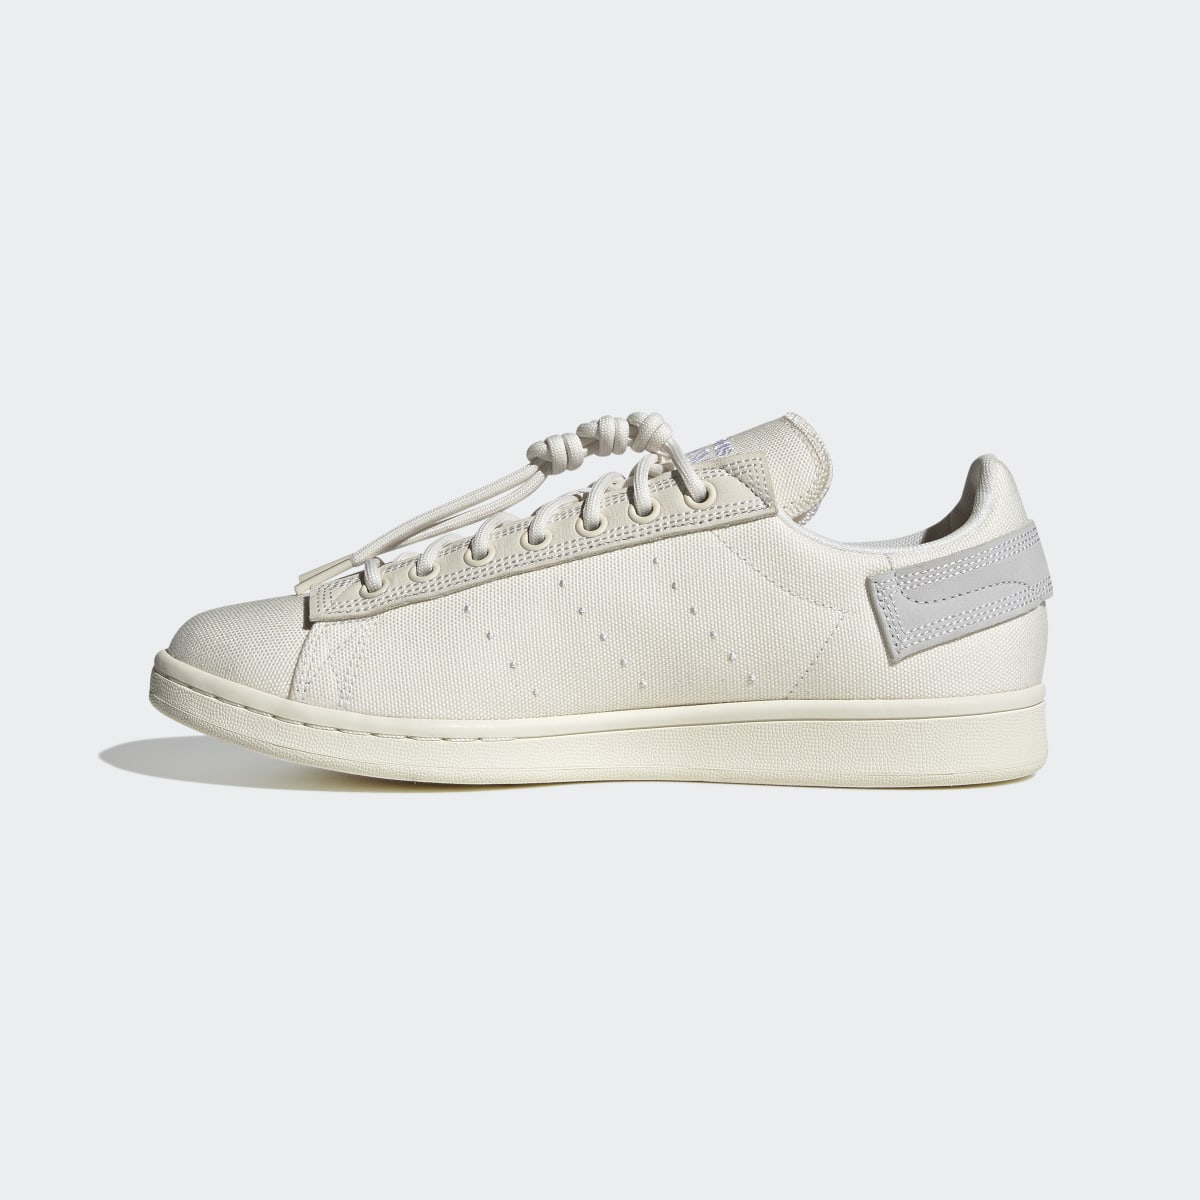 Adidas Stan Smith Parley Shoes. 11